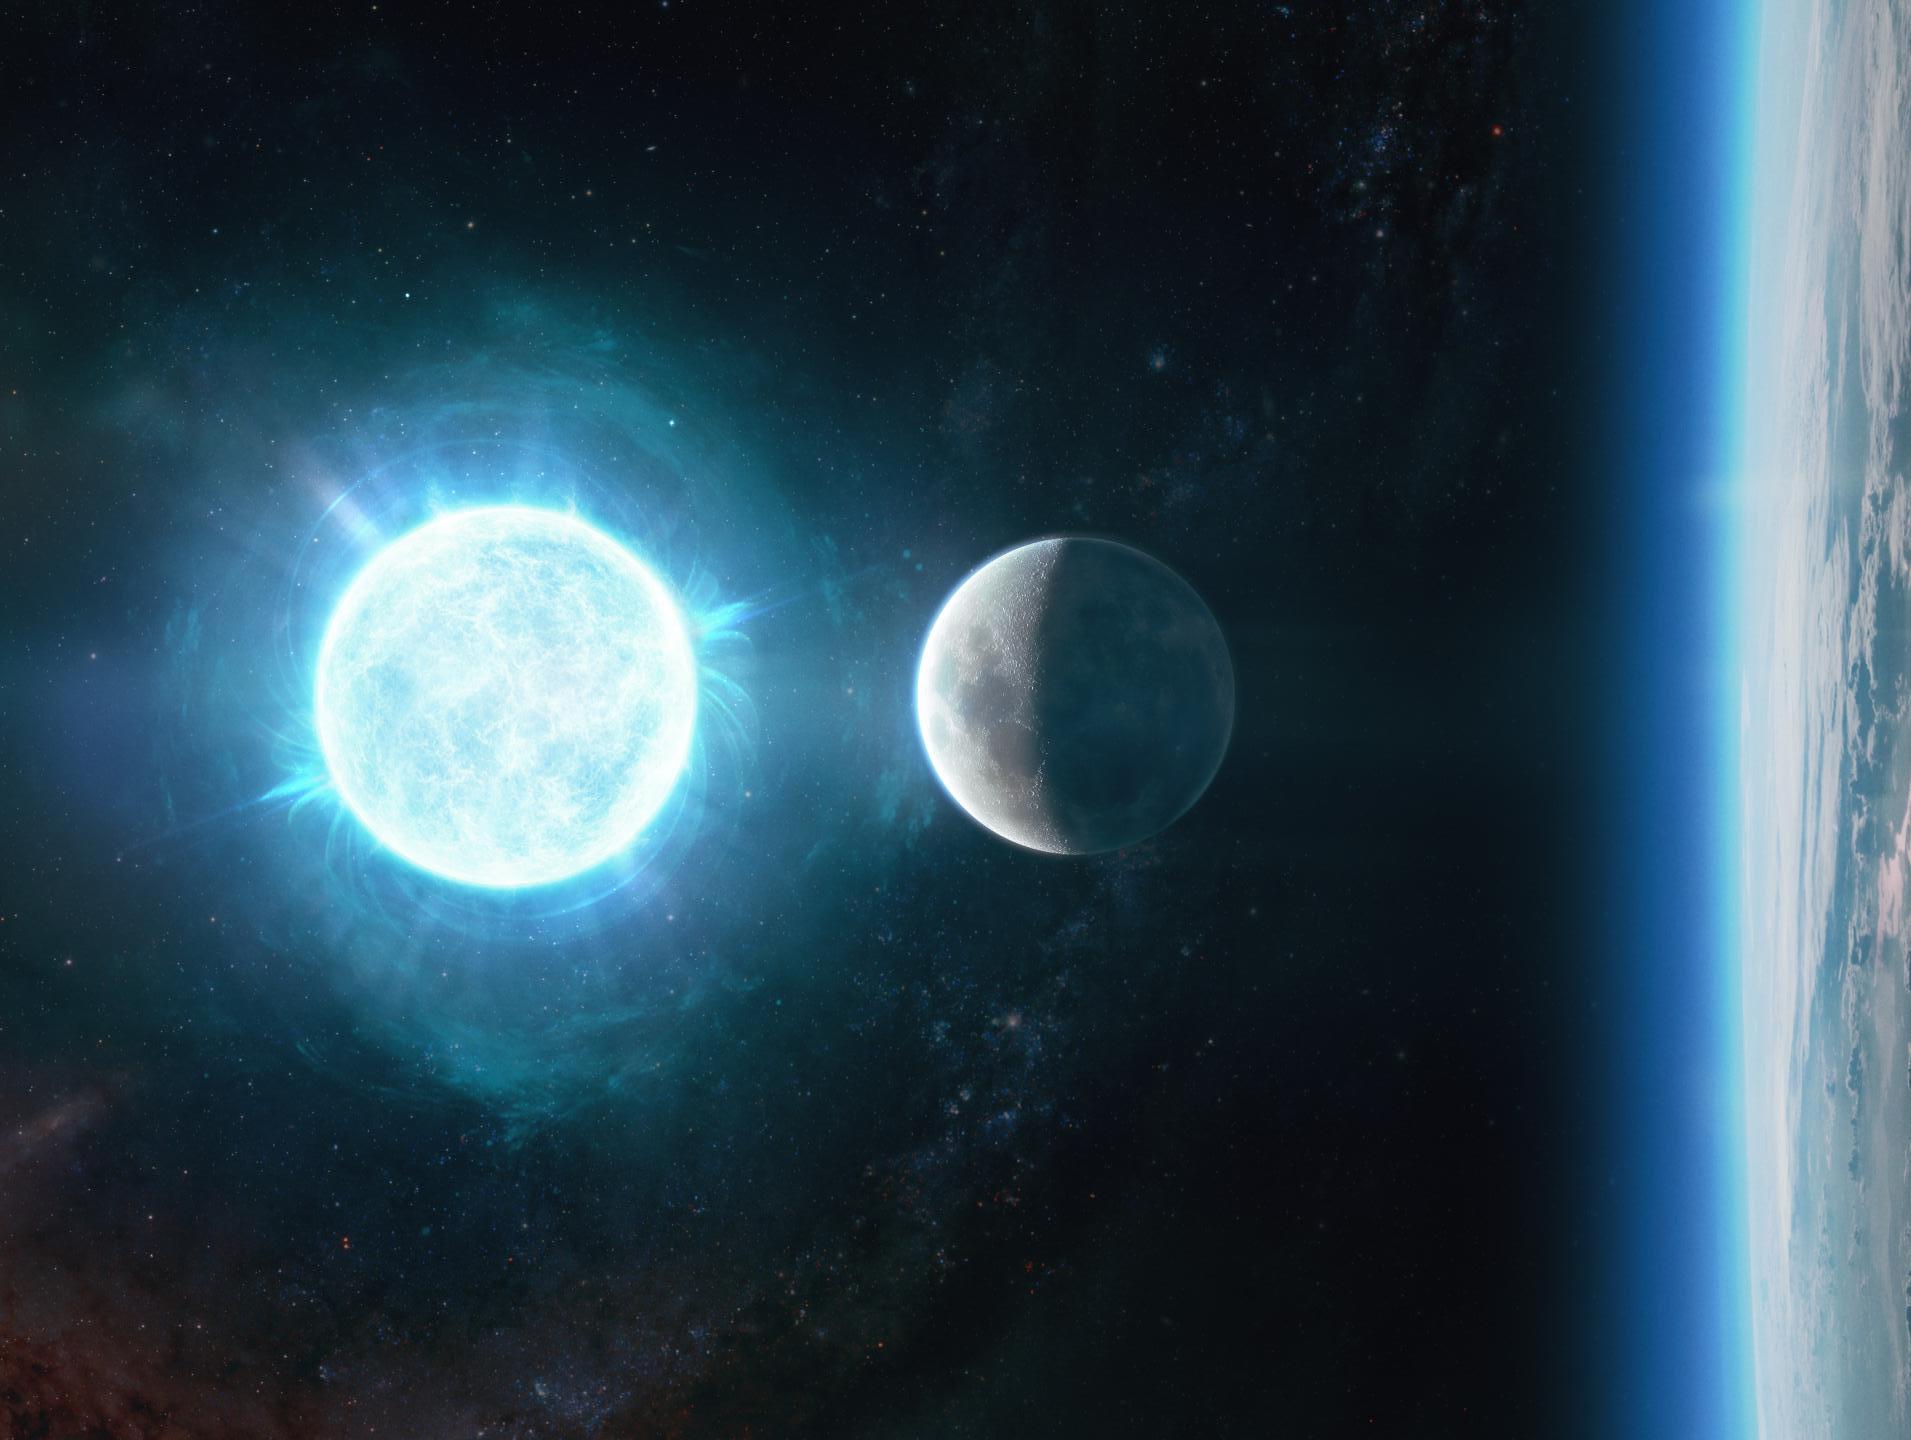 Discovery of white dwarf roughly the size of Earth’s moon